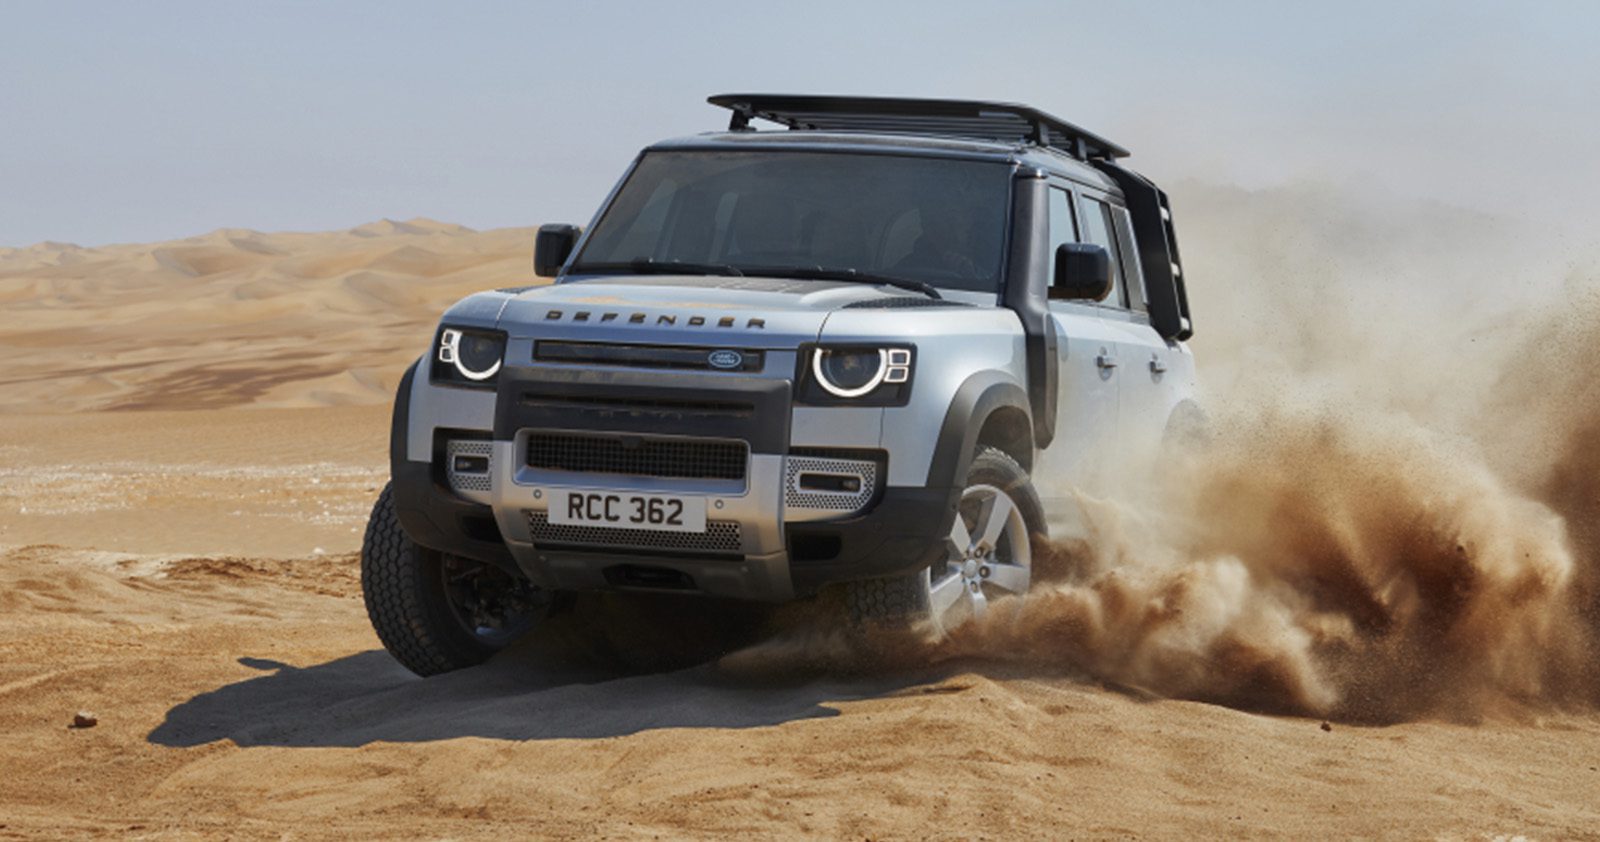 Silver new-generation Land Rover Defender in dunes